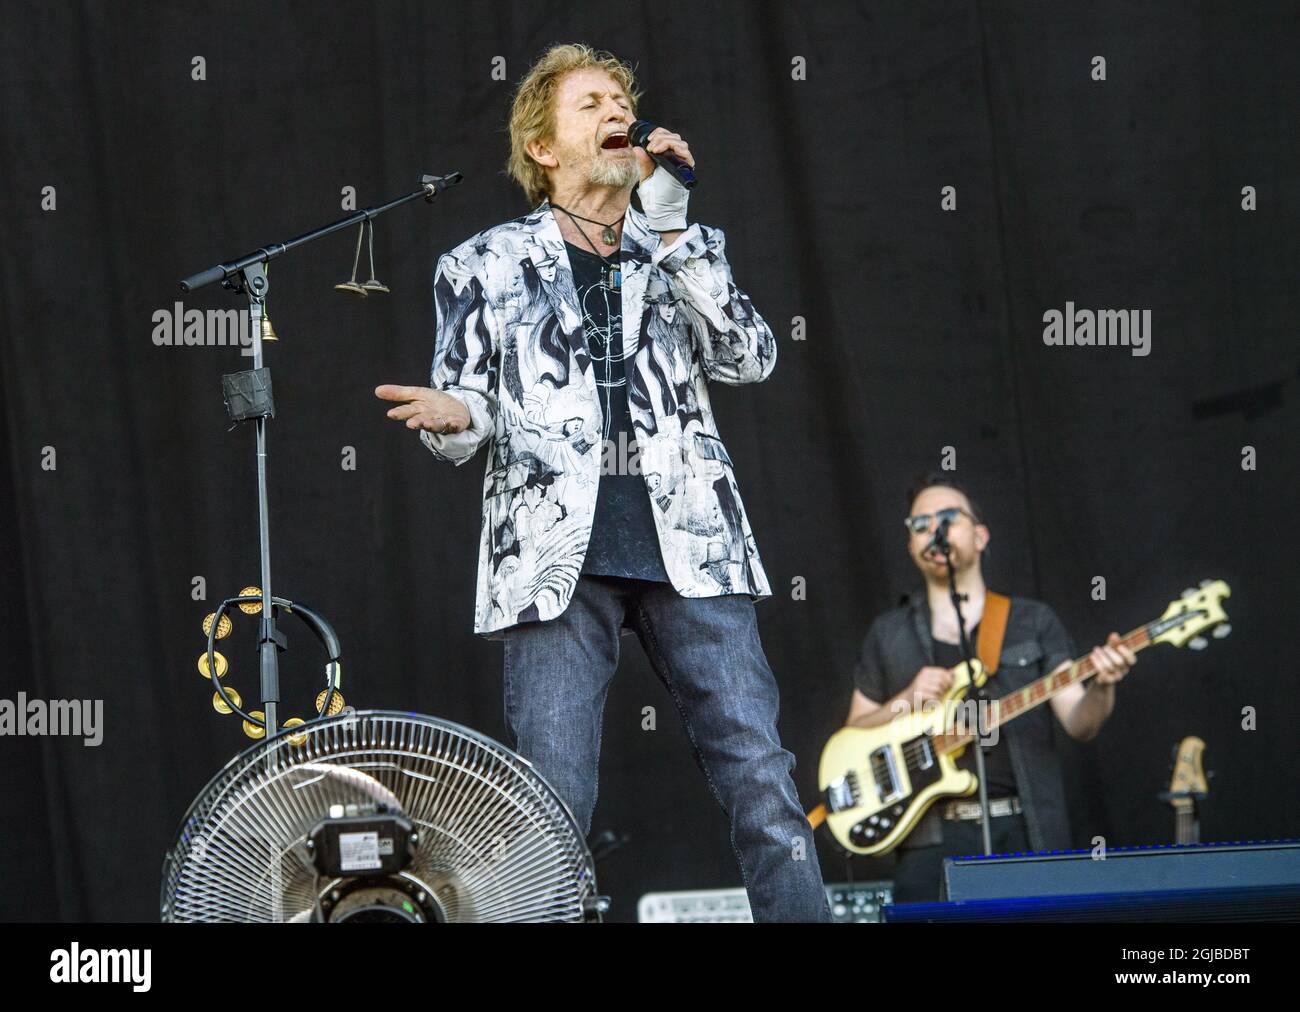 SOLVESBORG 20180609 YES featuring ARW (YES Featuring Jon Anderson, Trevor Rabin, Rick Wakeman) performs during the Sweden Rock Festival in Norje, outside Solvesborg in southern Sweden, on June 09, 2018. Photo: Claudio Bresciani / TT / code 10090  Stock Photo